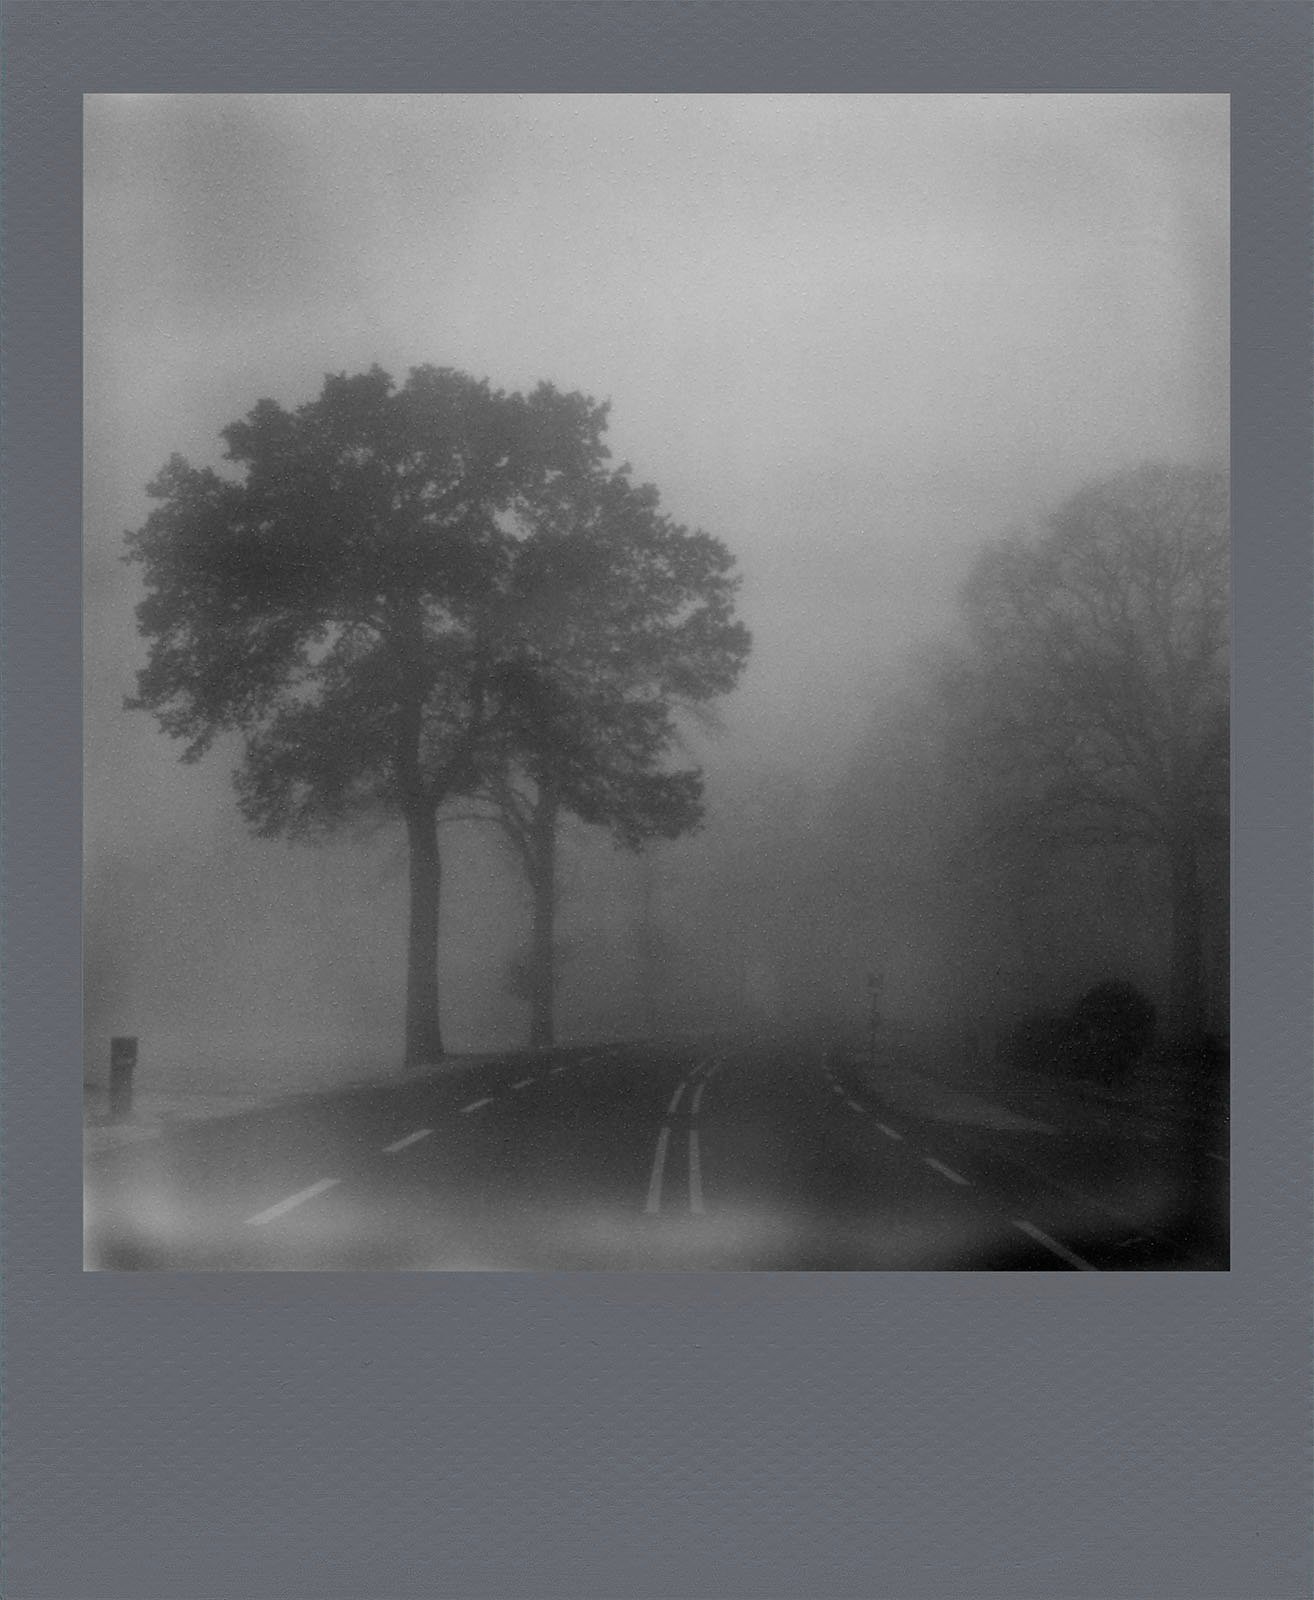 A foggy road with visible lane markings leading towards silhouettes of large trees obscured by the dense mist, creating a mysterious atmosphere.